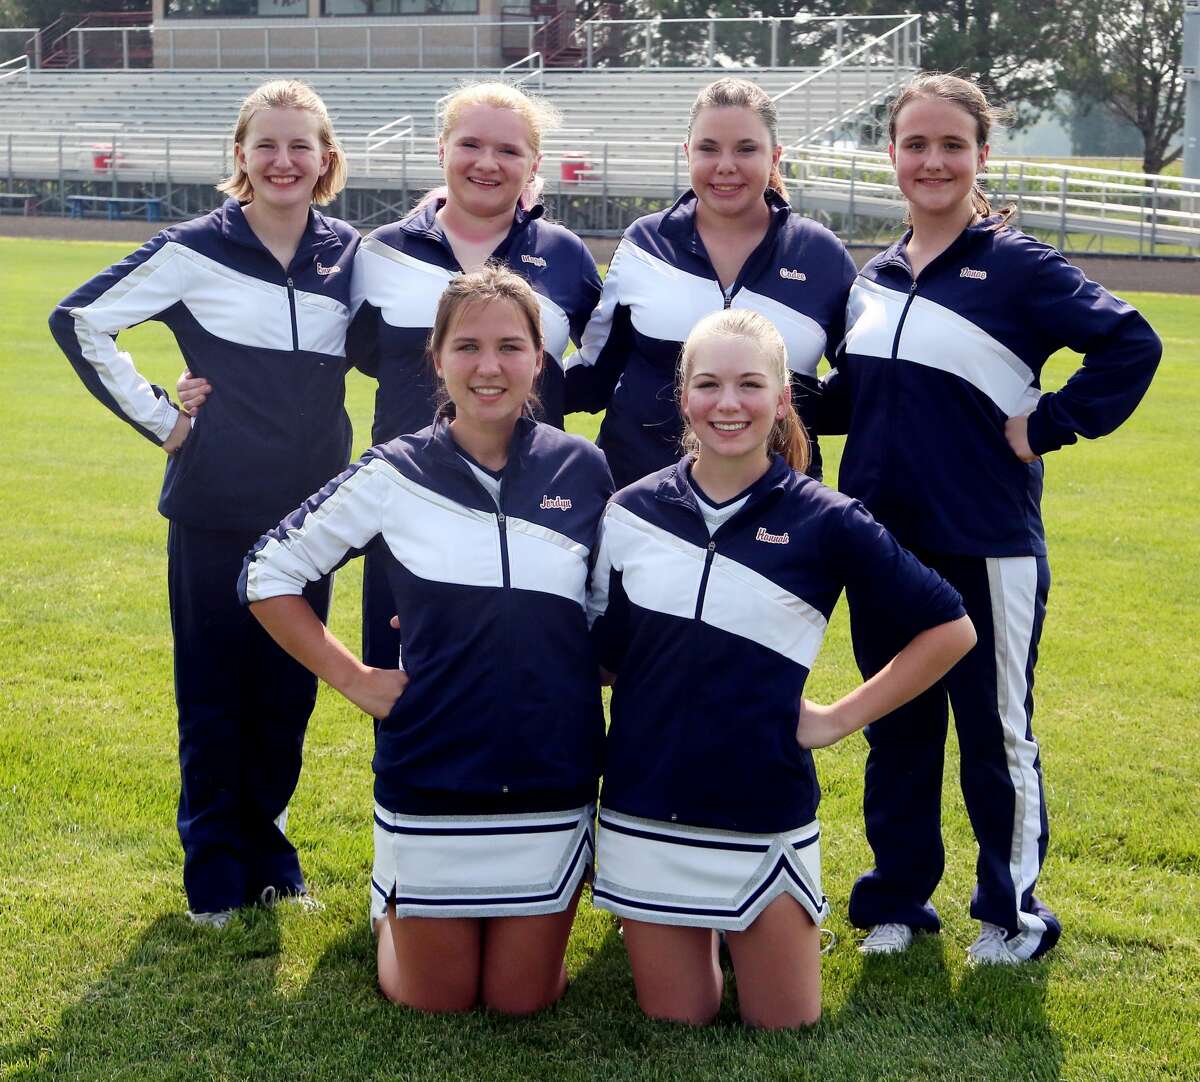 Members of the Unionville-Sebewaing Area cheerleading squad are (front row from left) Jordyn Cooper and Hannah Cryderman (back row) Emma Greenfield, Maggie Katzinger, Cadee Gemmell and Danae Hartman. (Paul P. Adams/Huron Daily Tribune)